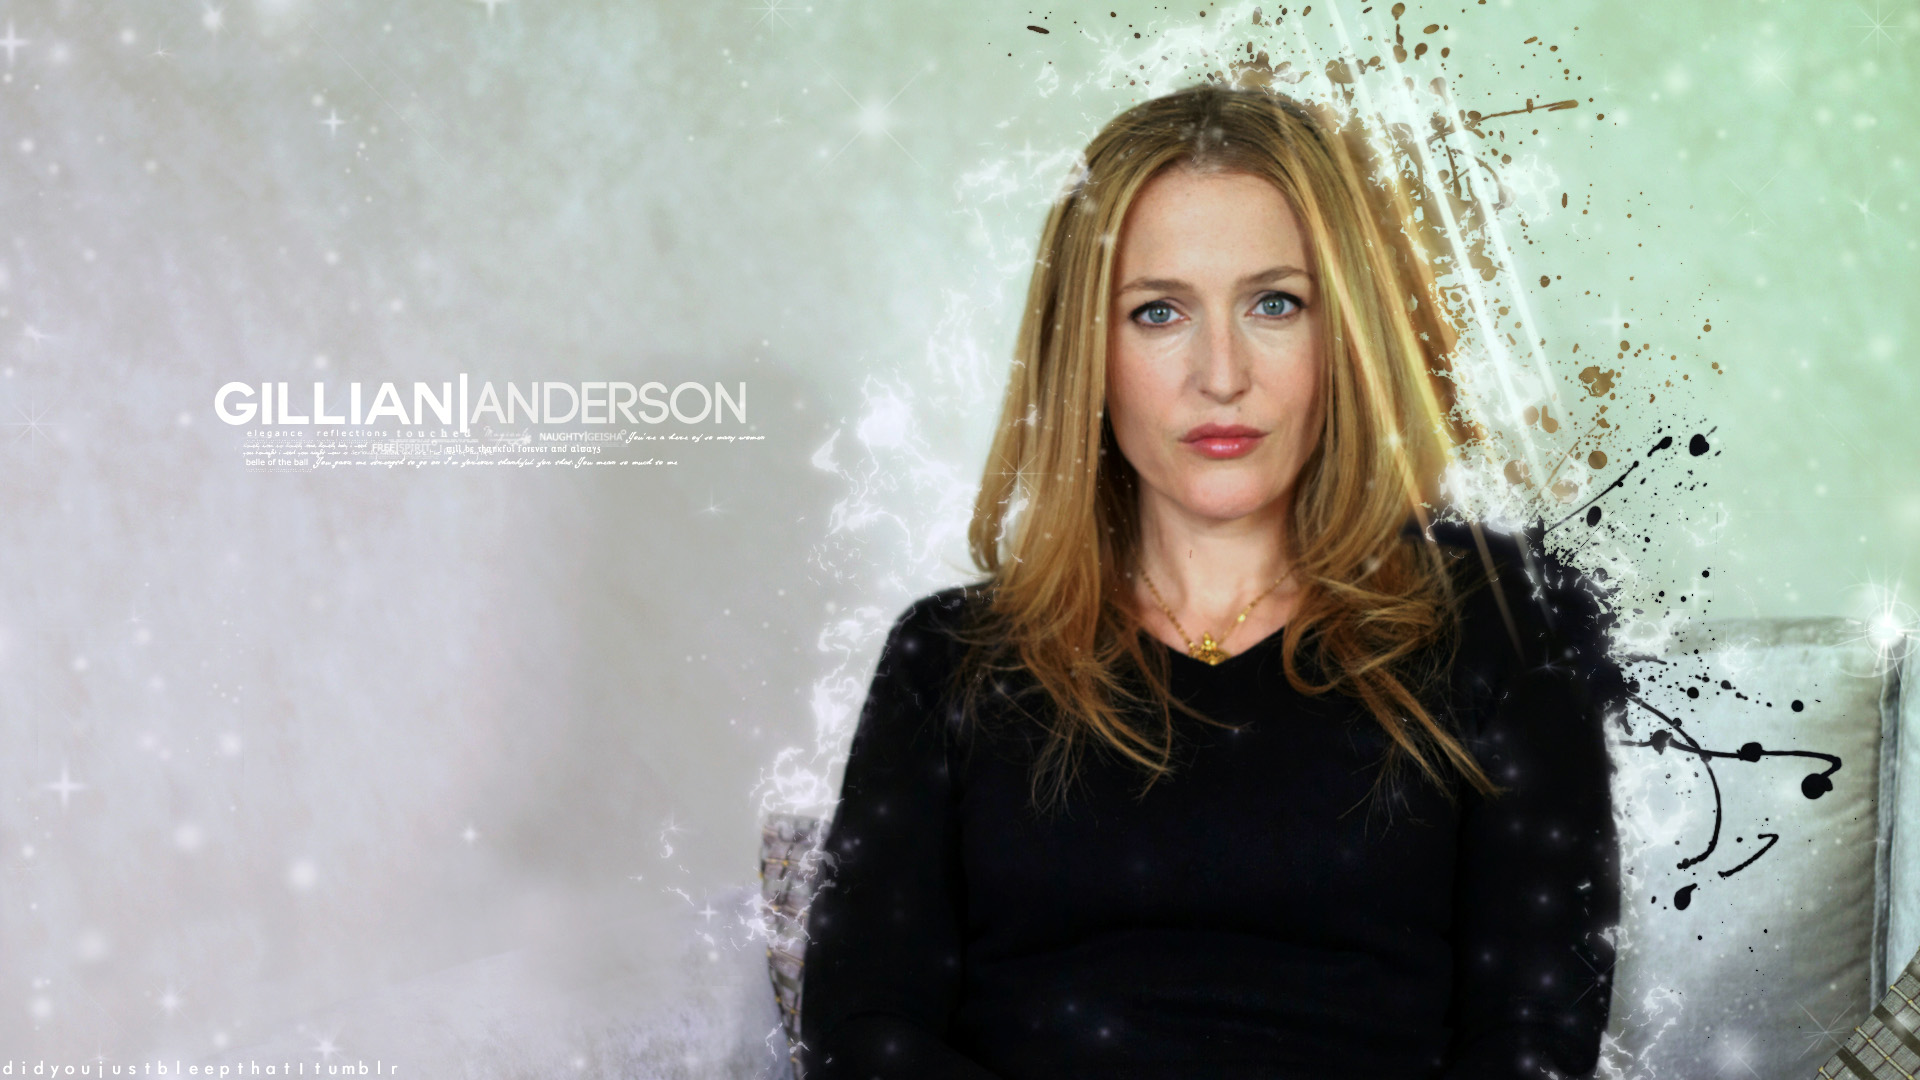 Gillian Anderson Wallpaper High Resolution And Quality